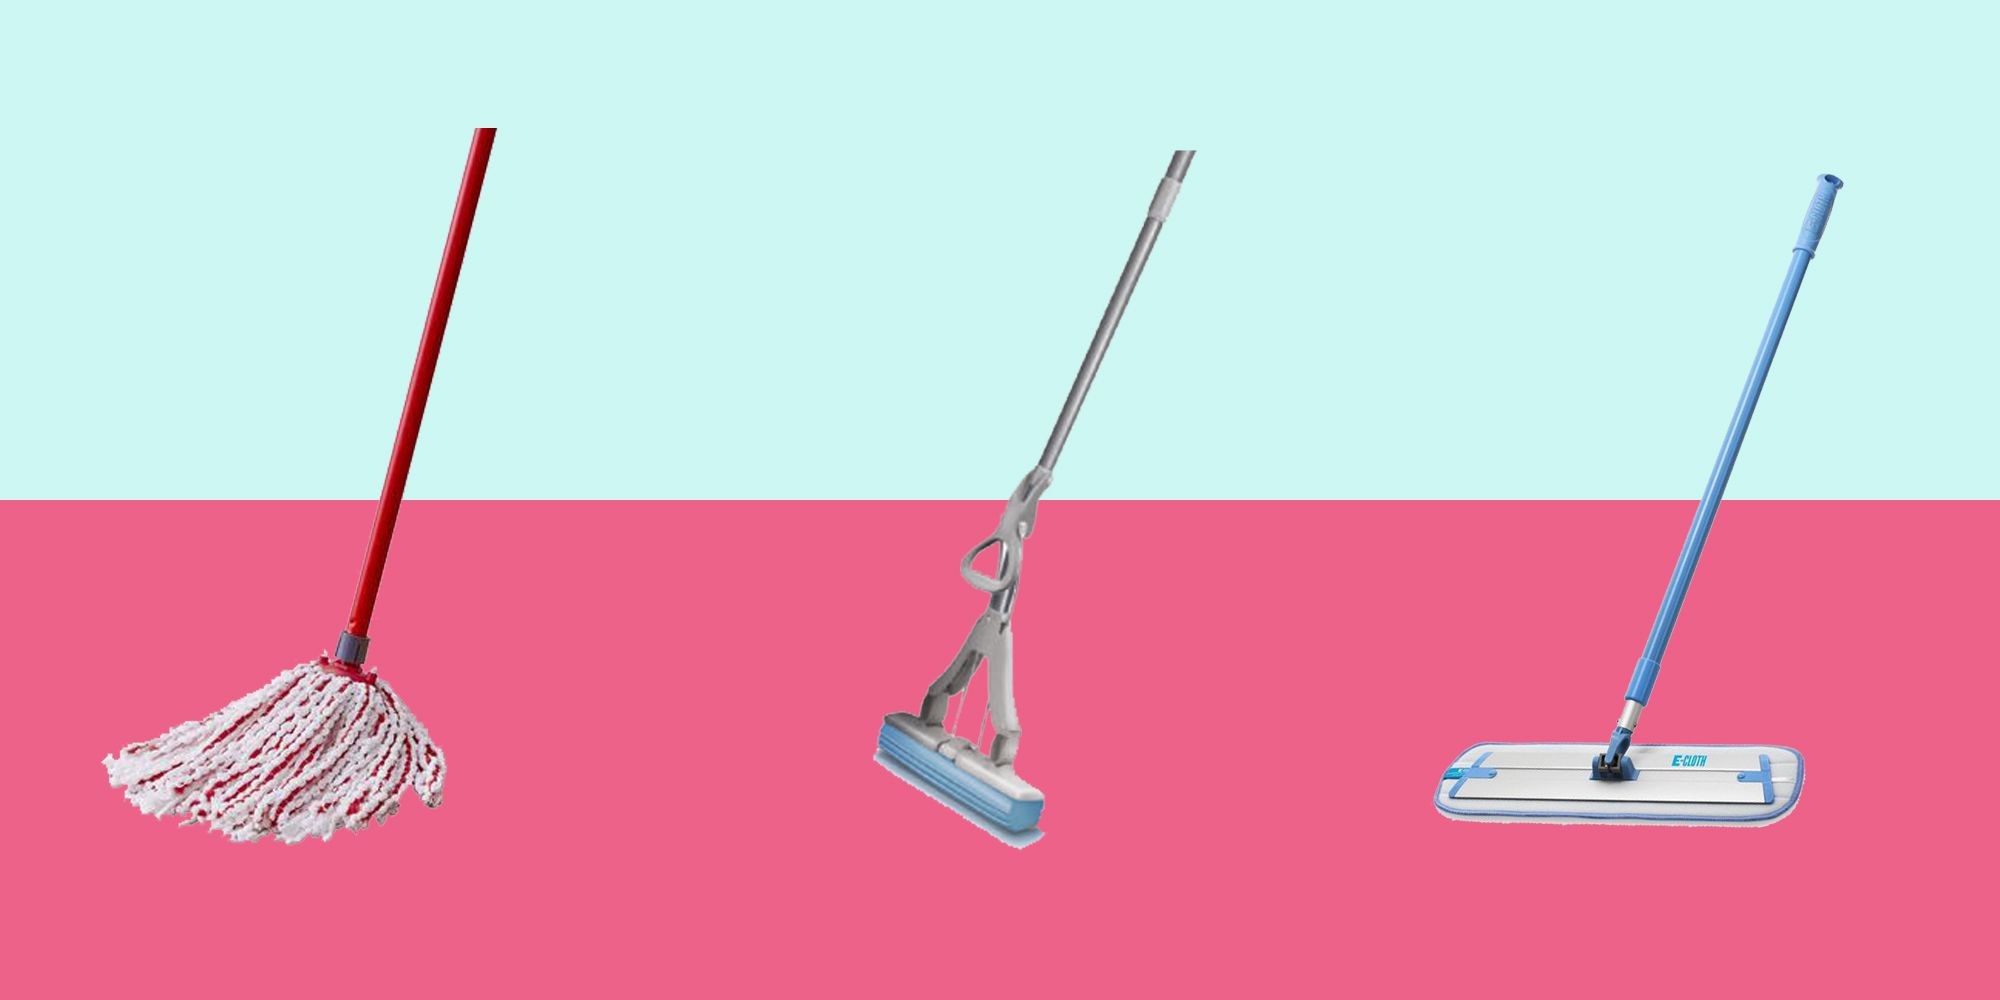 How to mop and the best mop to use